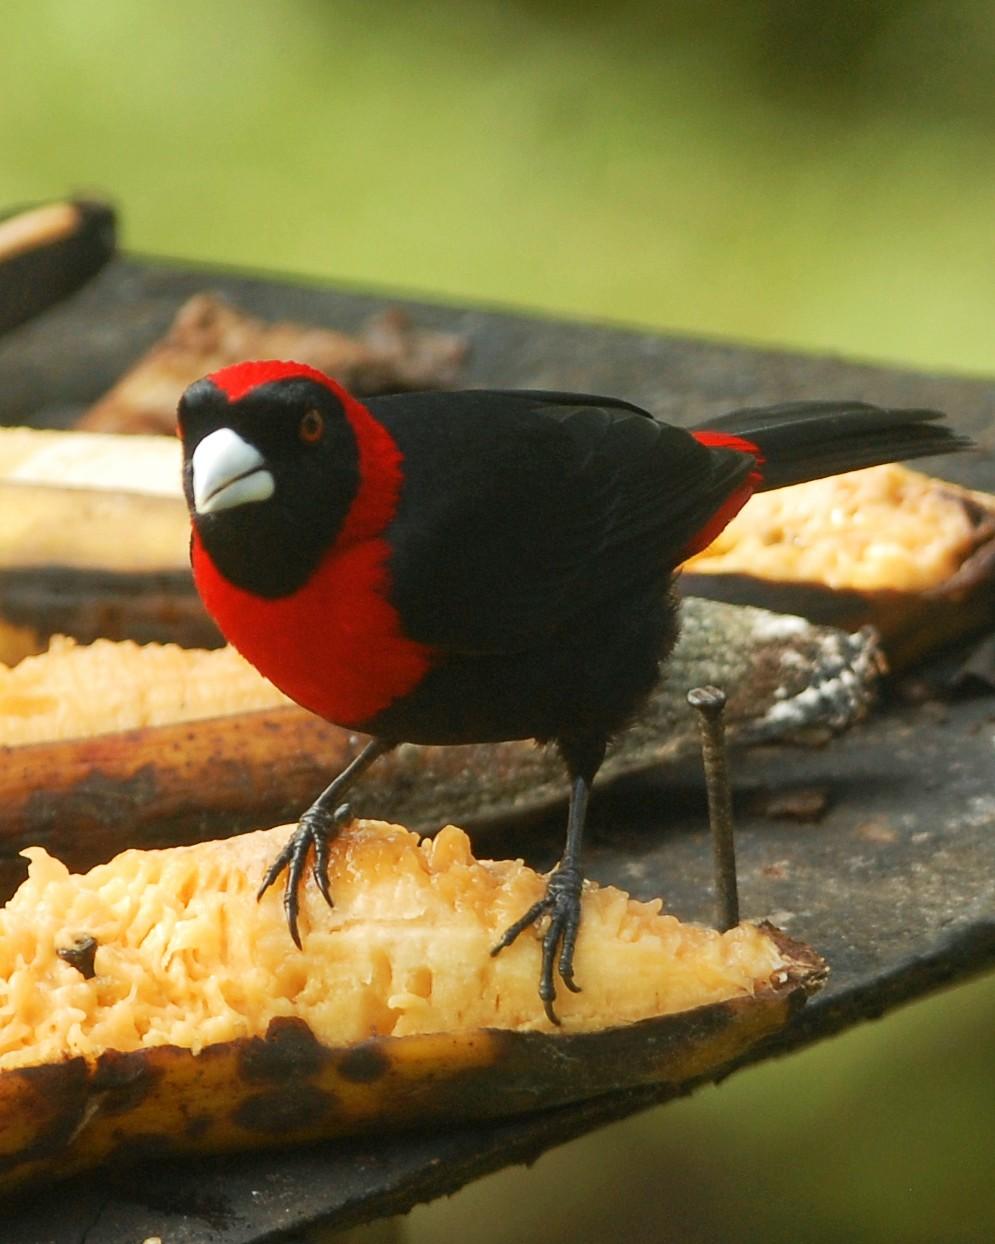 Crimson-collared Tanager Photo by David Hollie